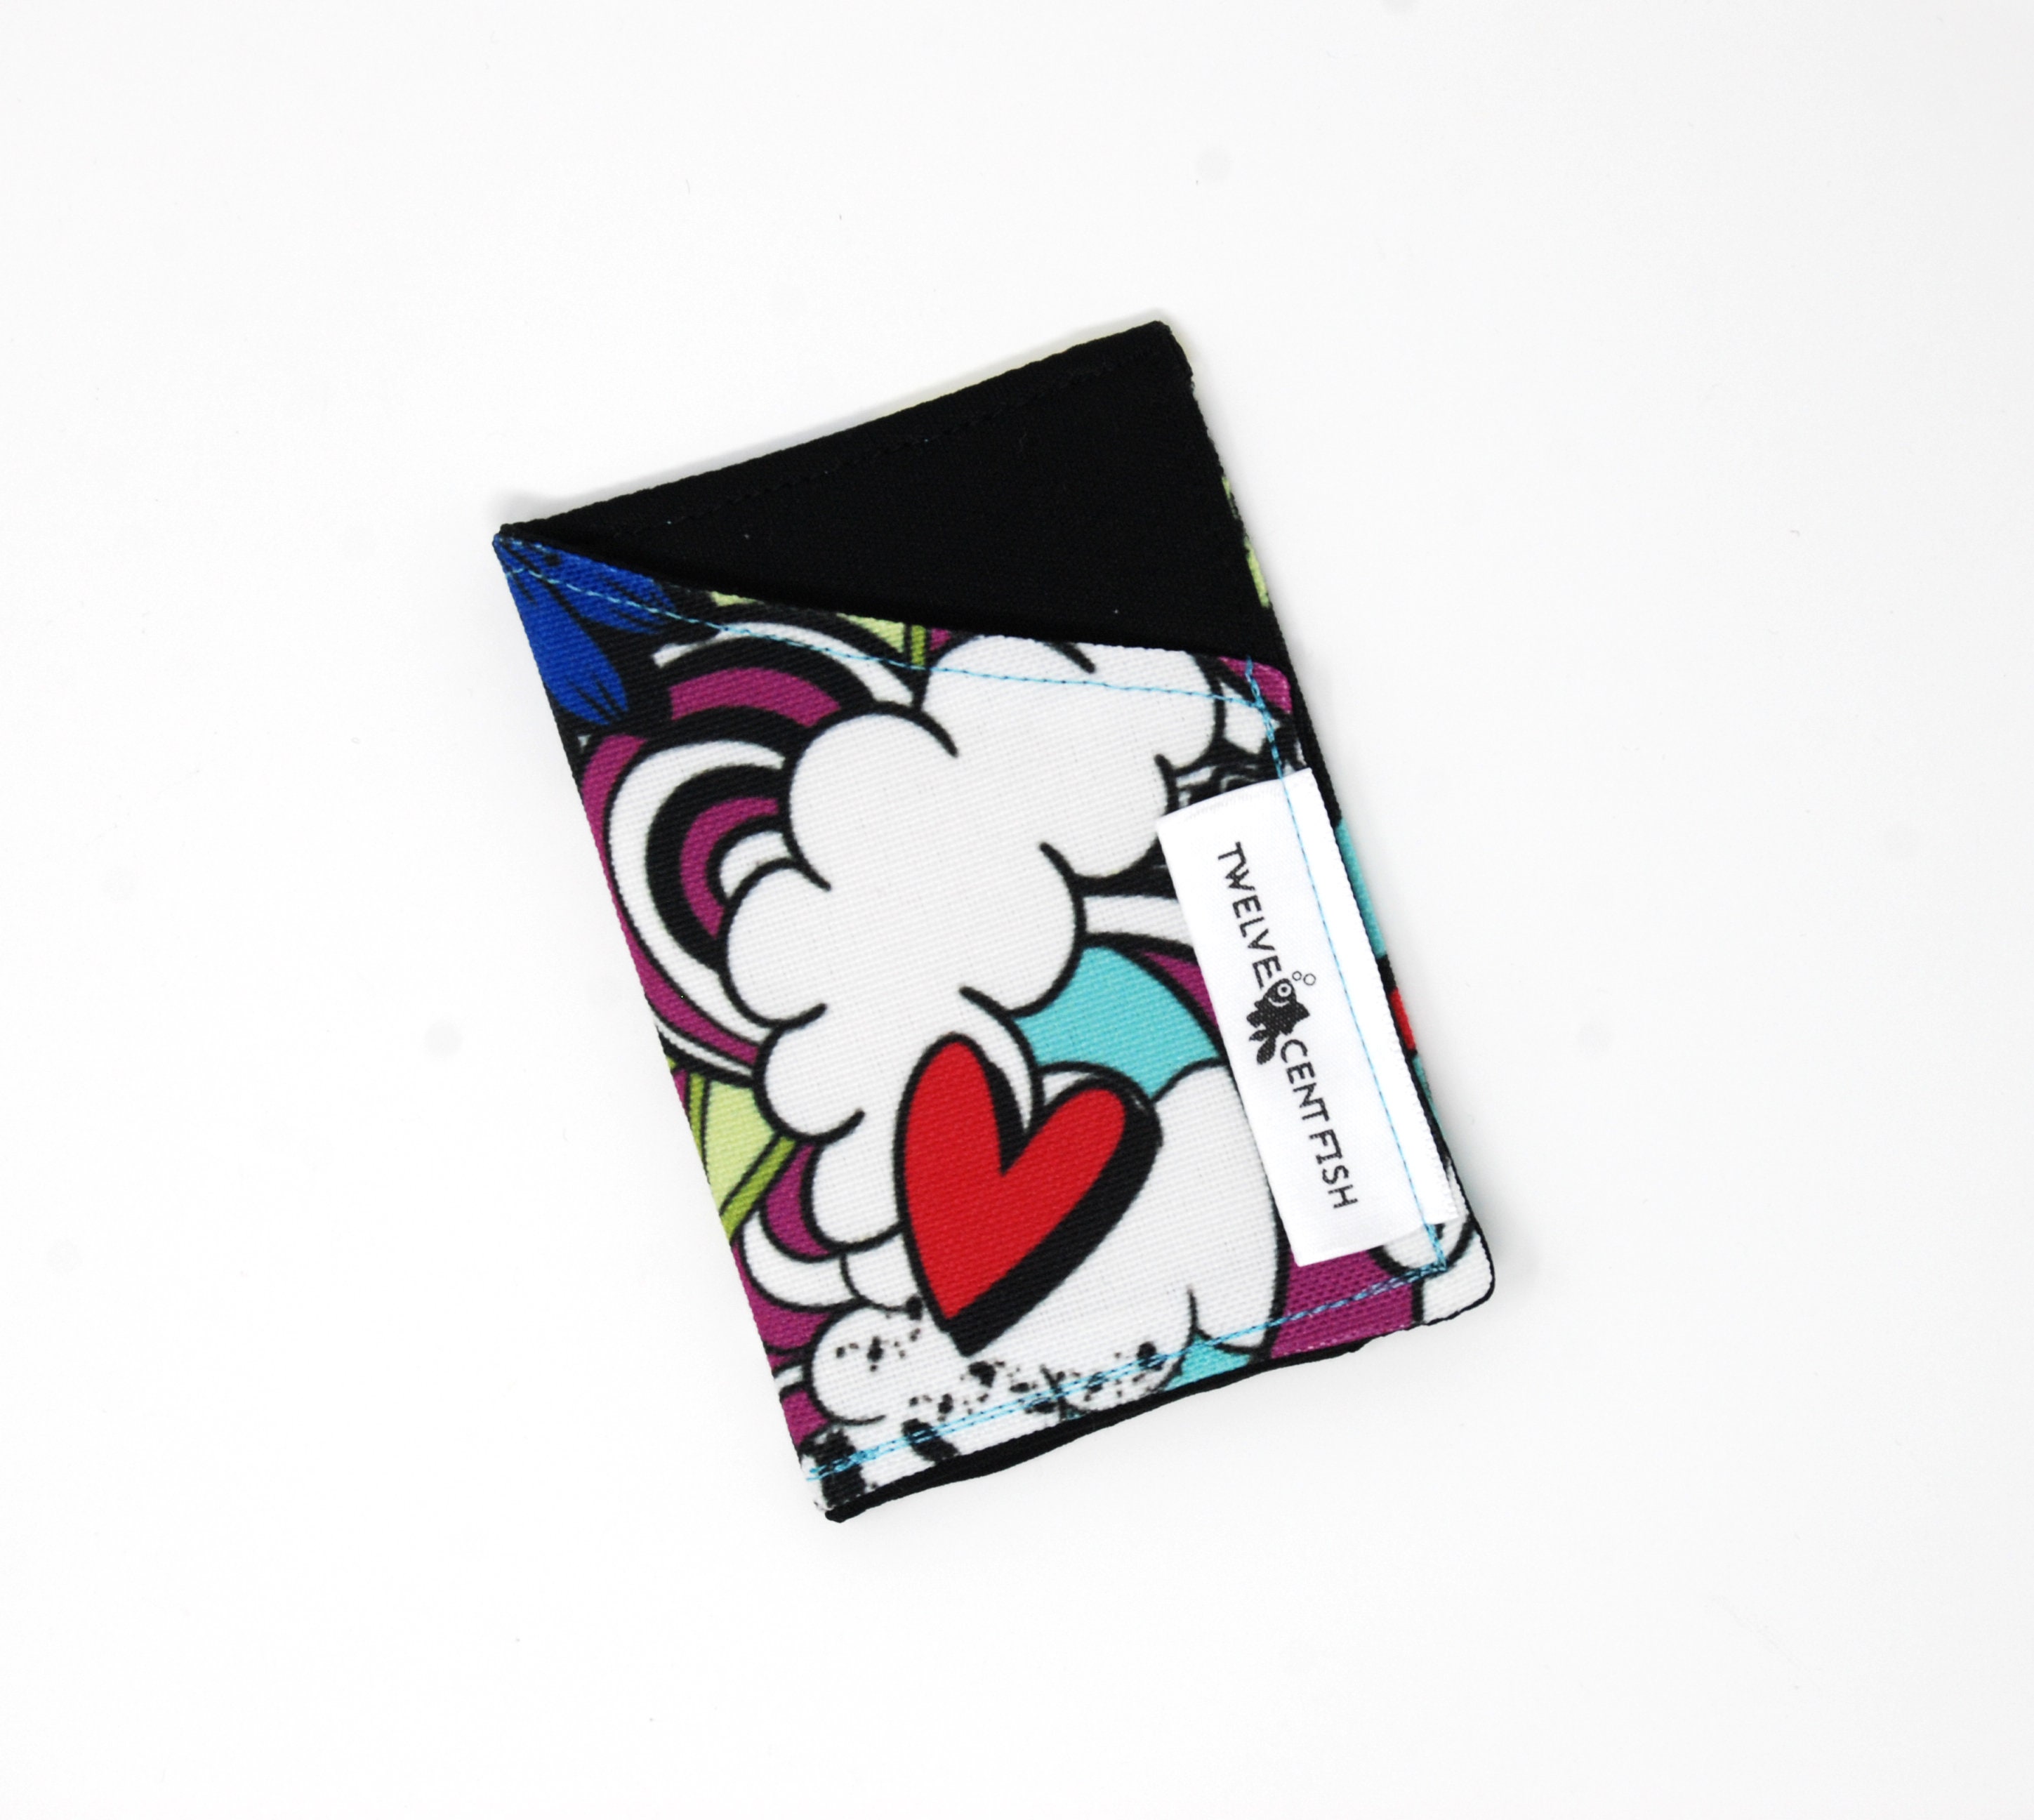 Pop My Heart Pouch H29 - Wallets and Small Leather Goods